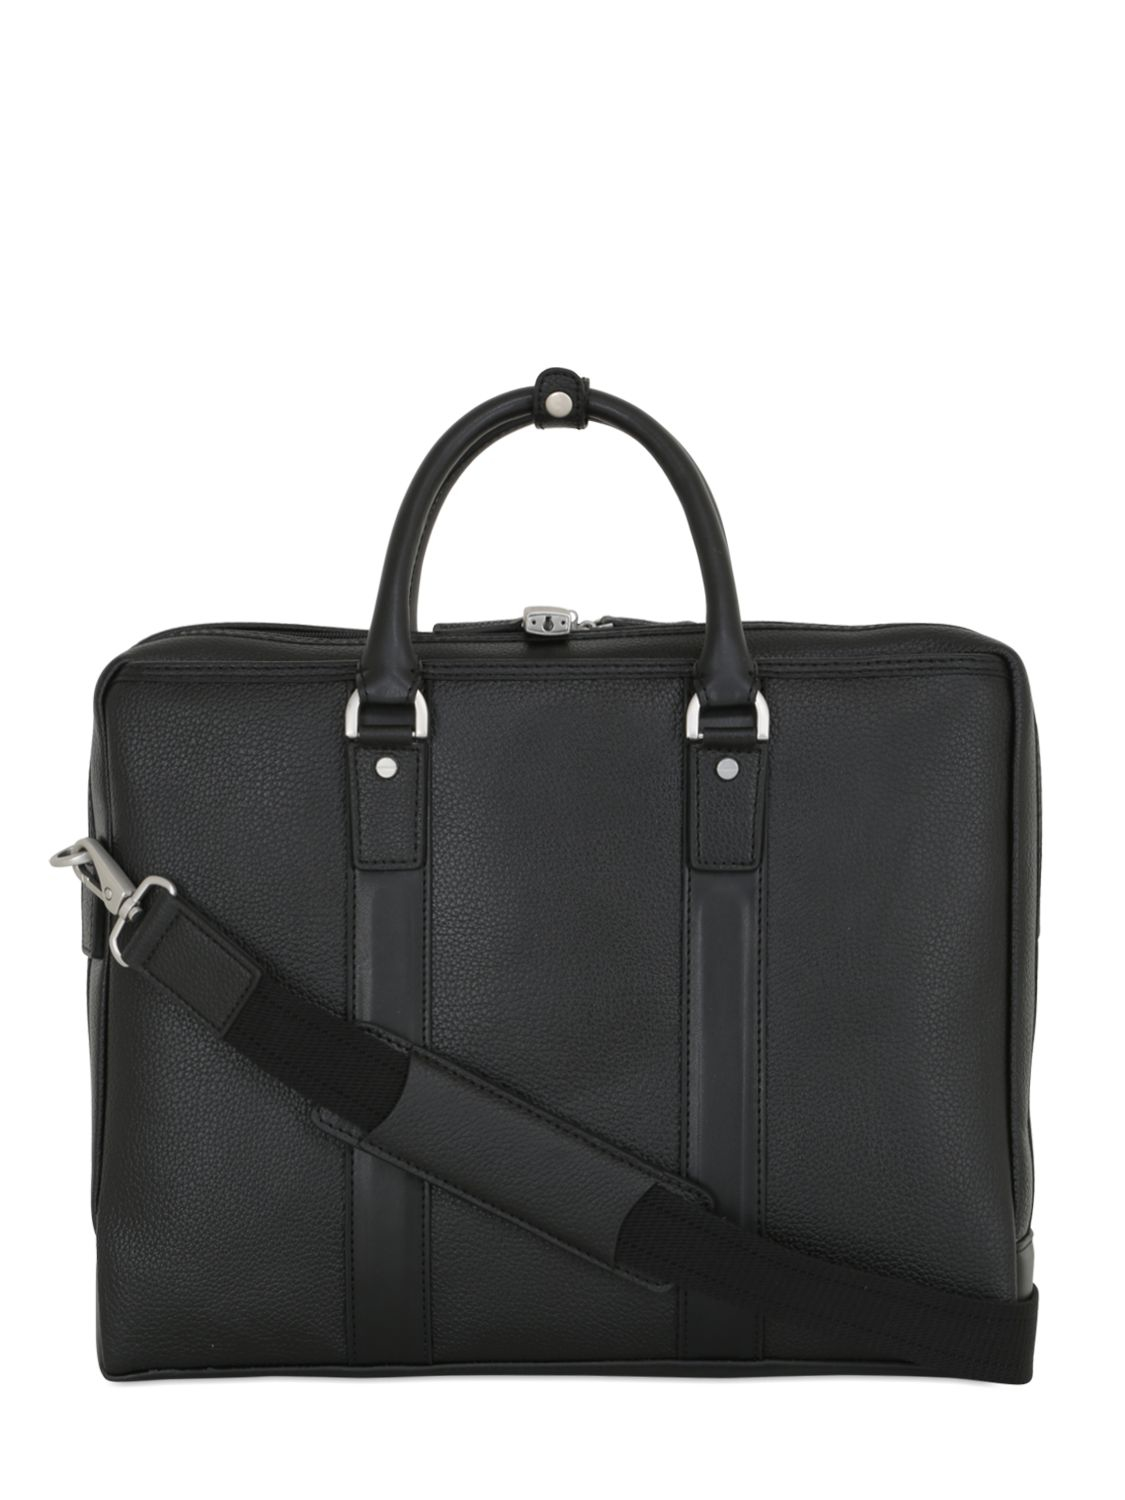 Lyst - Brooks Brothers Leather Briefcase in Black for Men